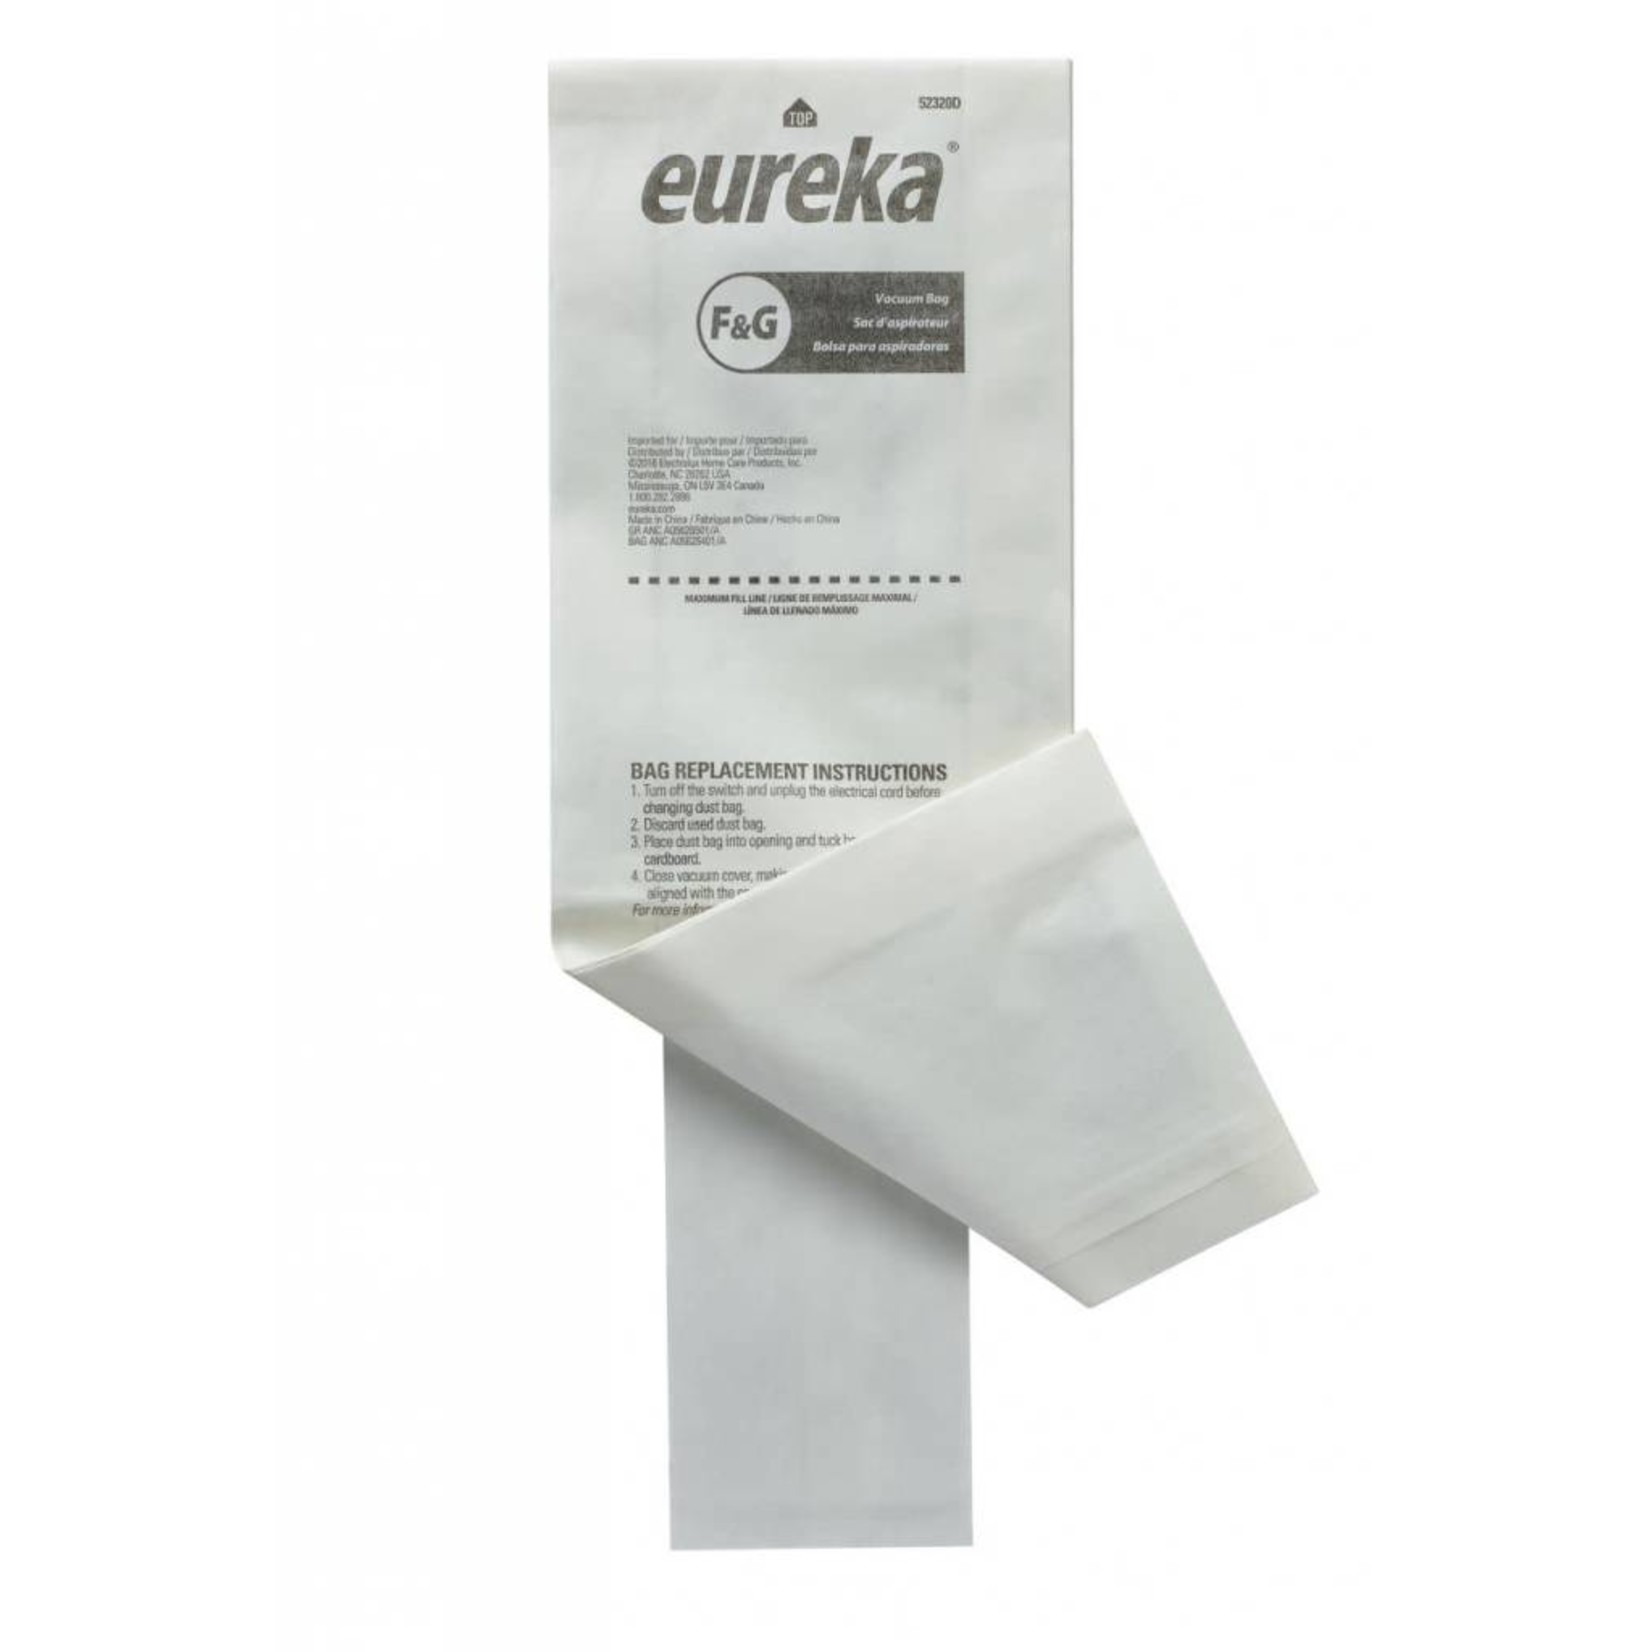 3M 3M Eureka/Sanitaire Style "F&G" Micro Allergen Bags - 3 Pack